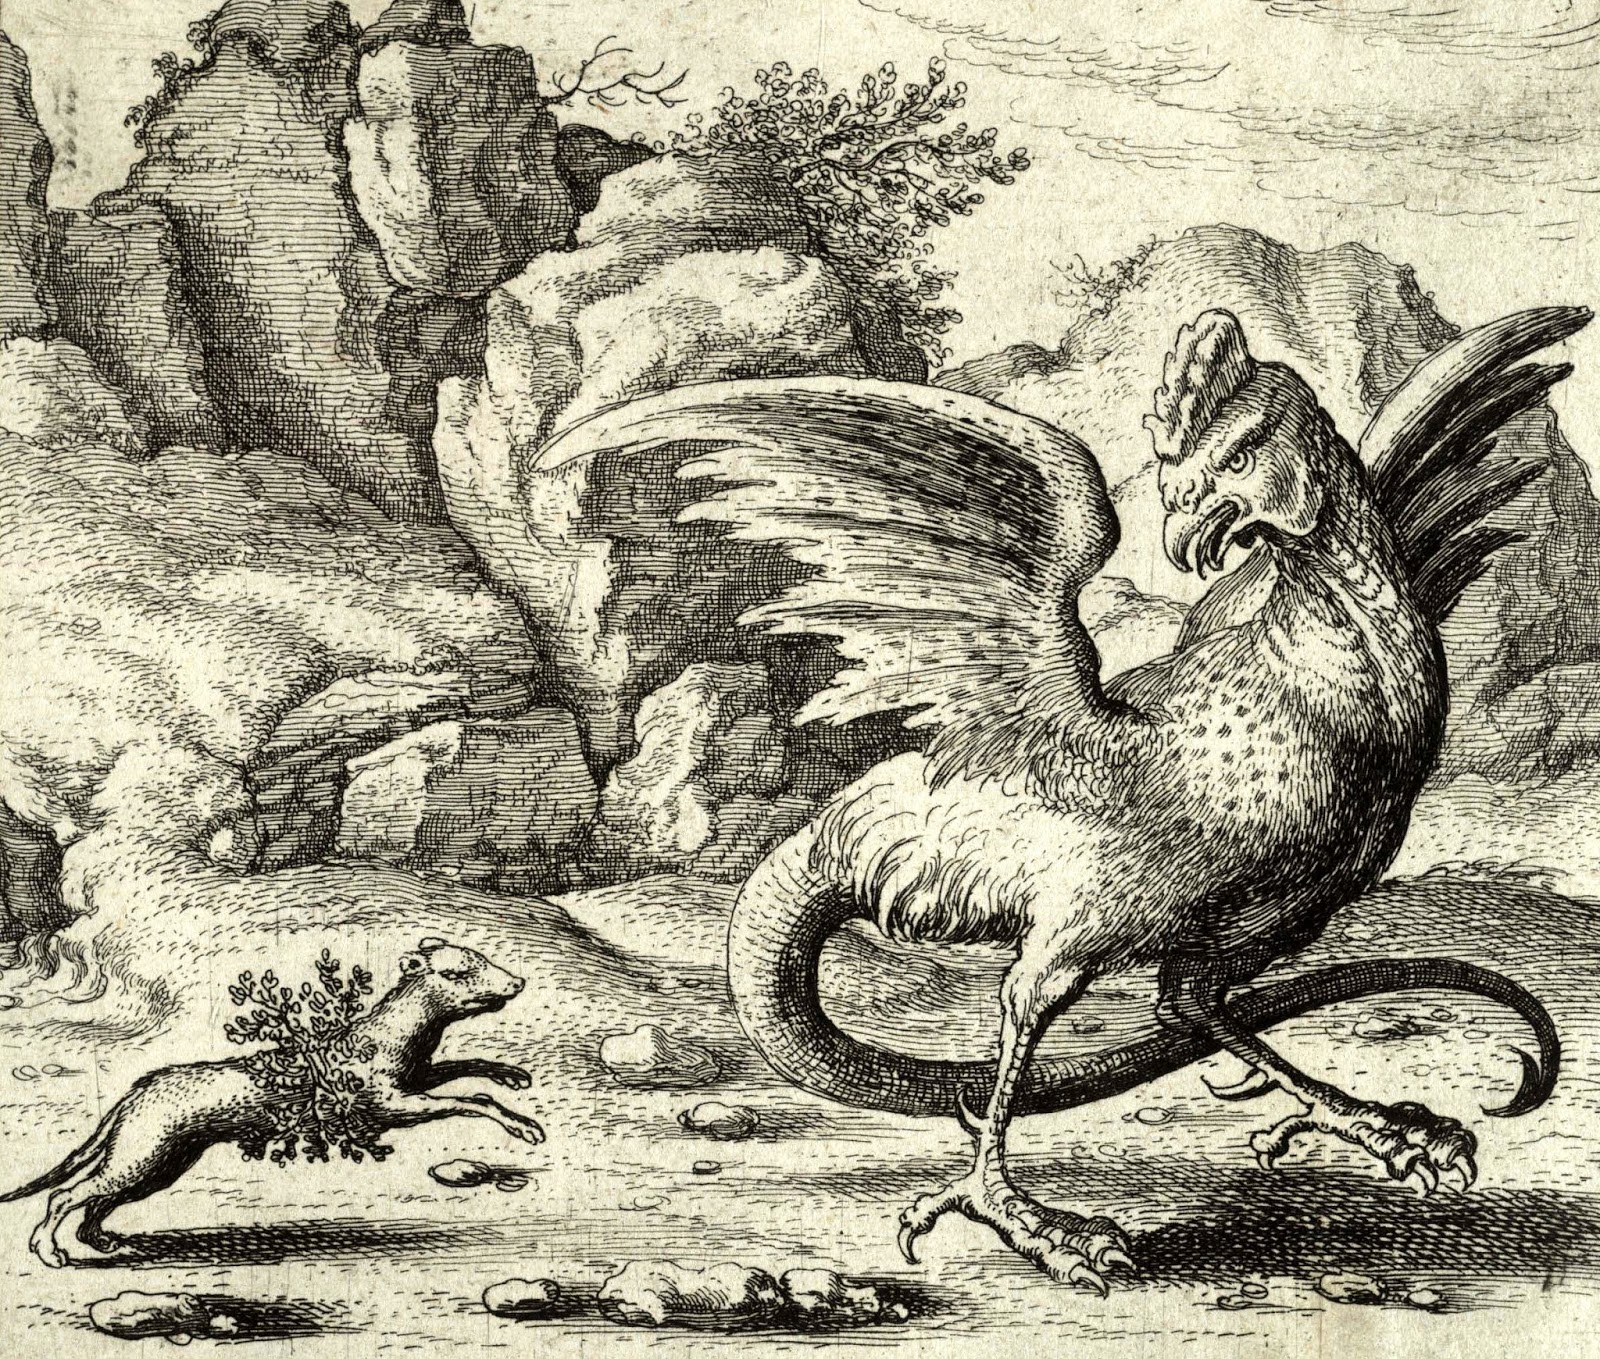 Engraving by Bohemian etcher Wenceslaus Hollar (1607-1677) depicting a cockatrice being attacked by a weasel wrapped in rue